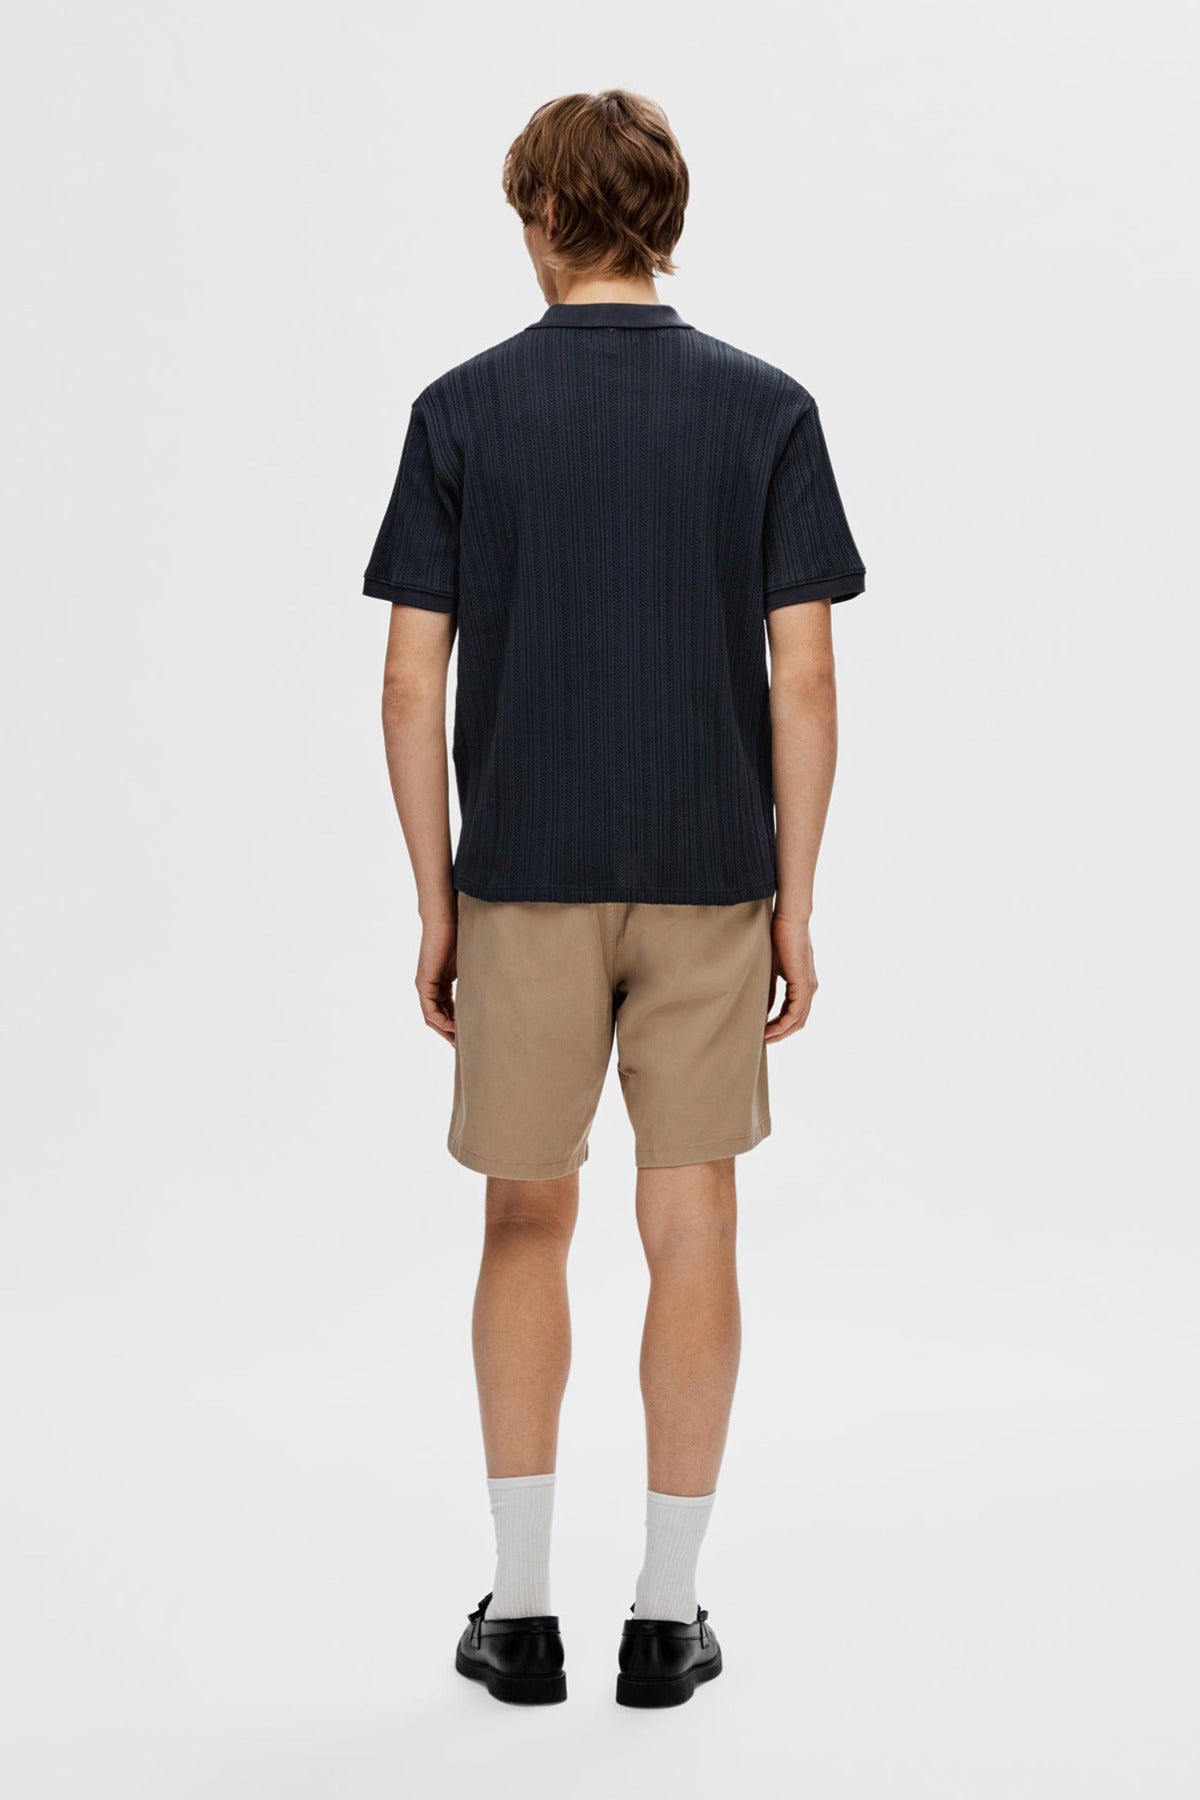 SELECTED HOMME Polo Jaden Jacquar